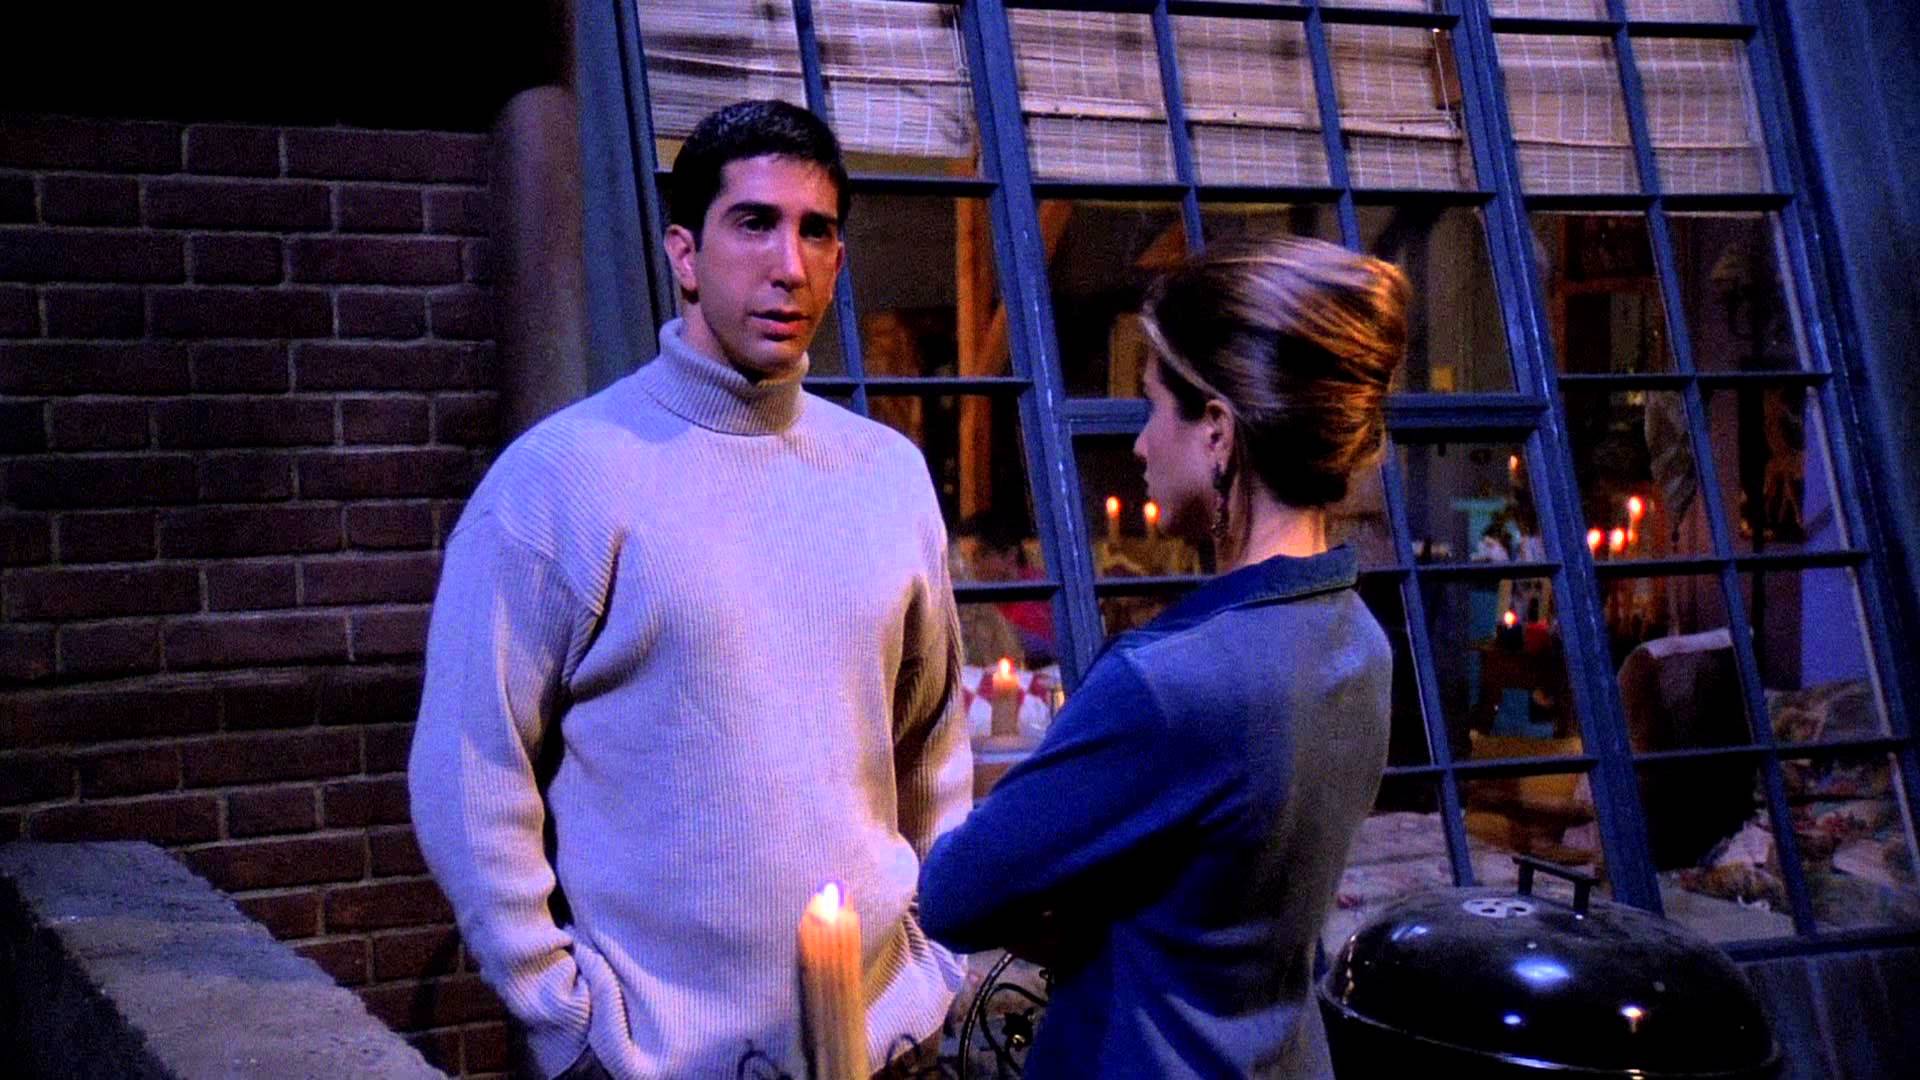 Can You Name These “Friends” Episodes by Their Screenshots? 